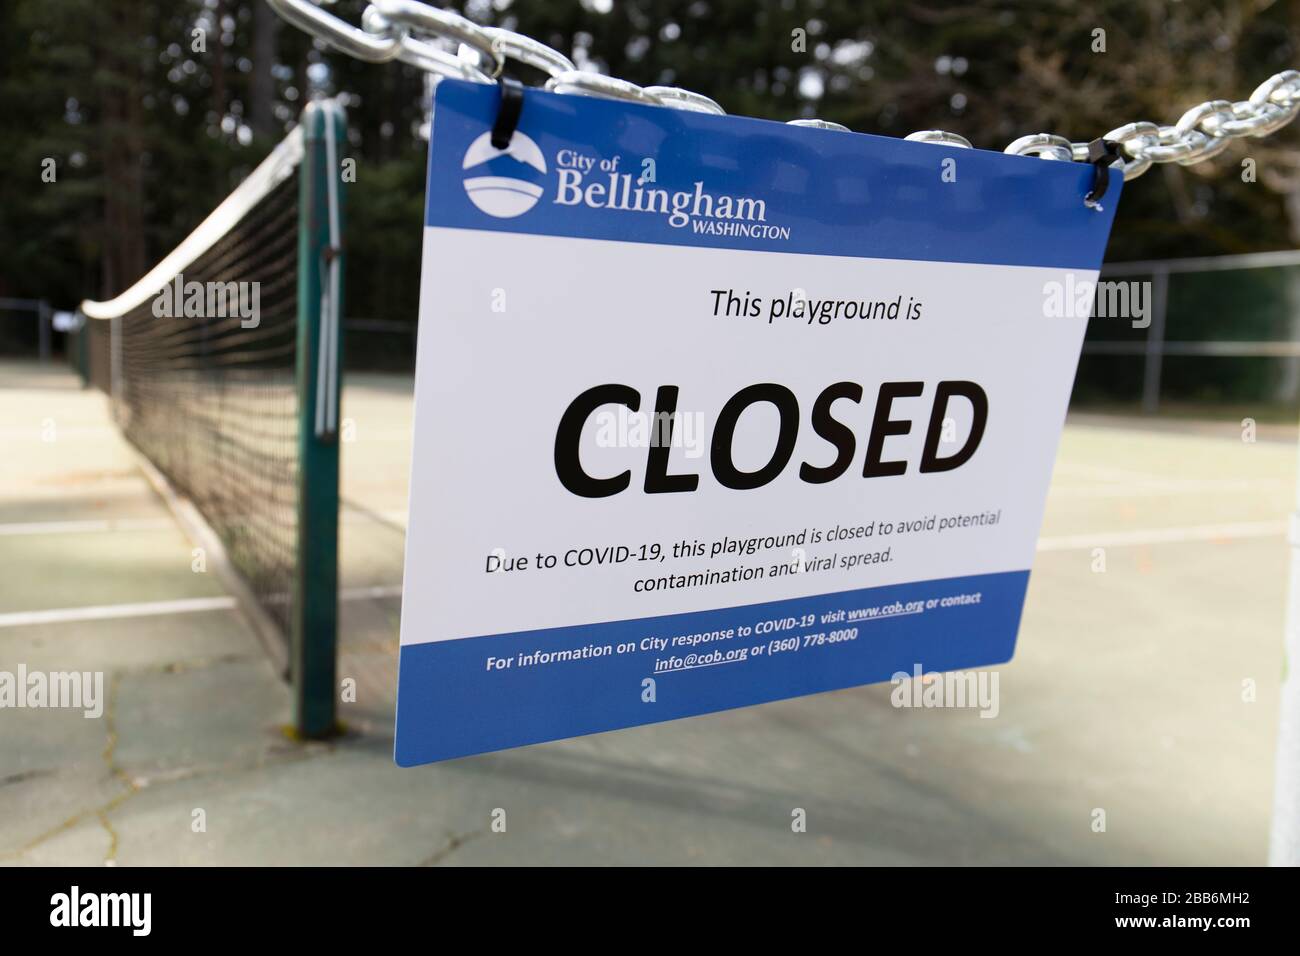 Bellingham, Washington USA - March 29, 2020: Playground Closed Sign on Tennis Court Due to Coronavirus Covid-19 Social Distancing Rules Stock Photo